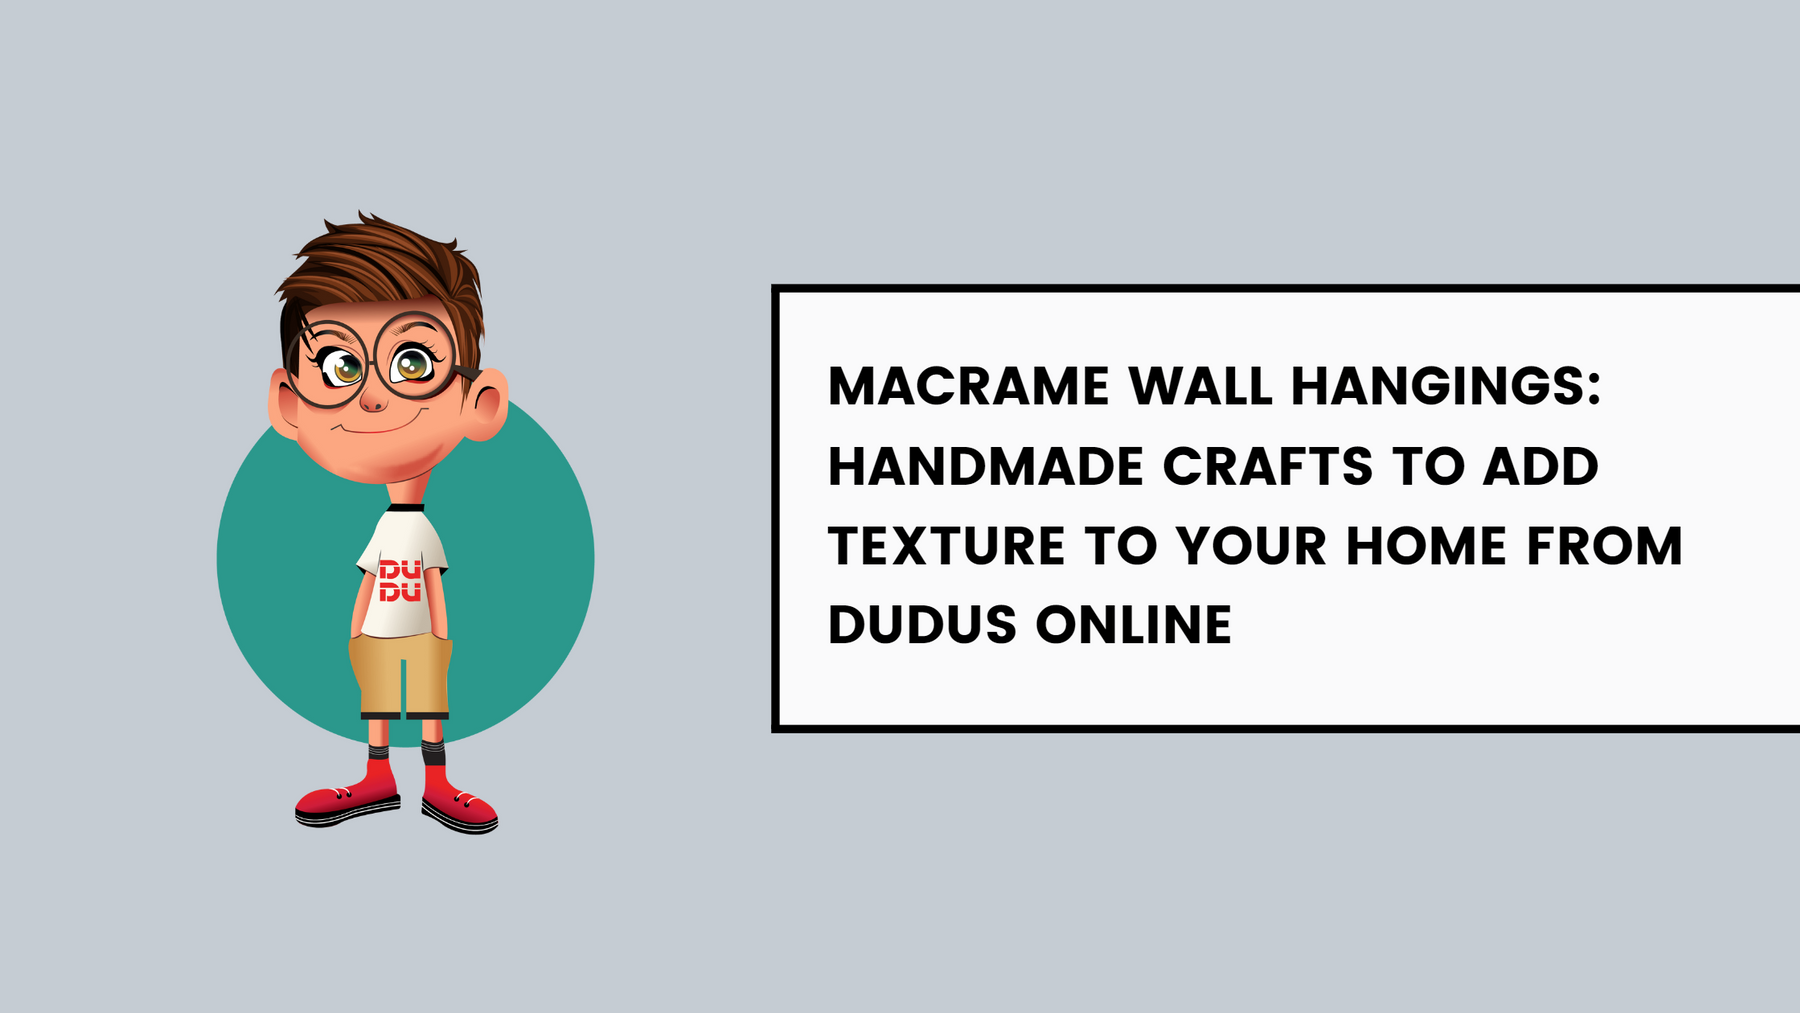 Macrame Wall Hangings: Handmade Crafts To Add Texture To Your Home From Dudus Online